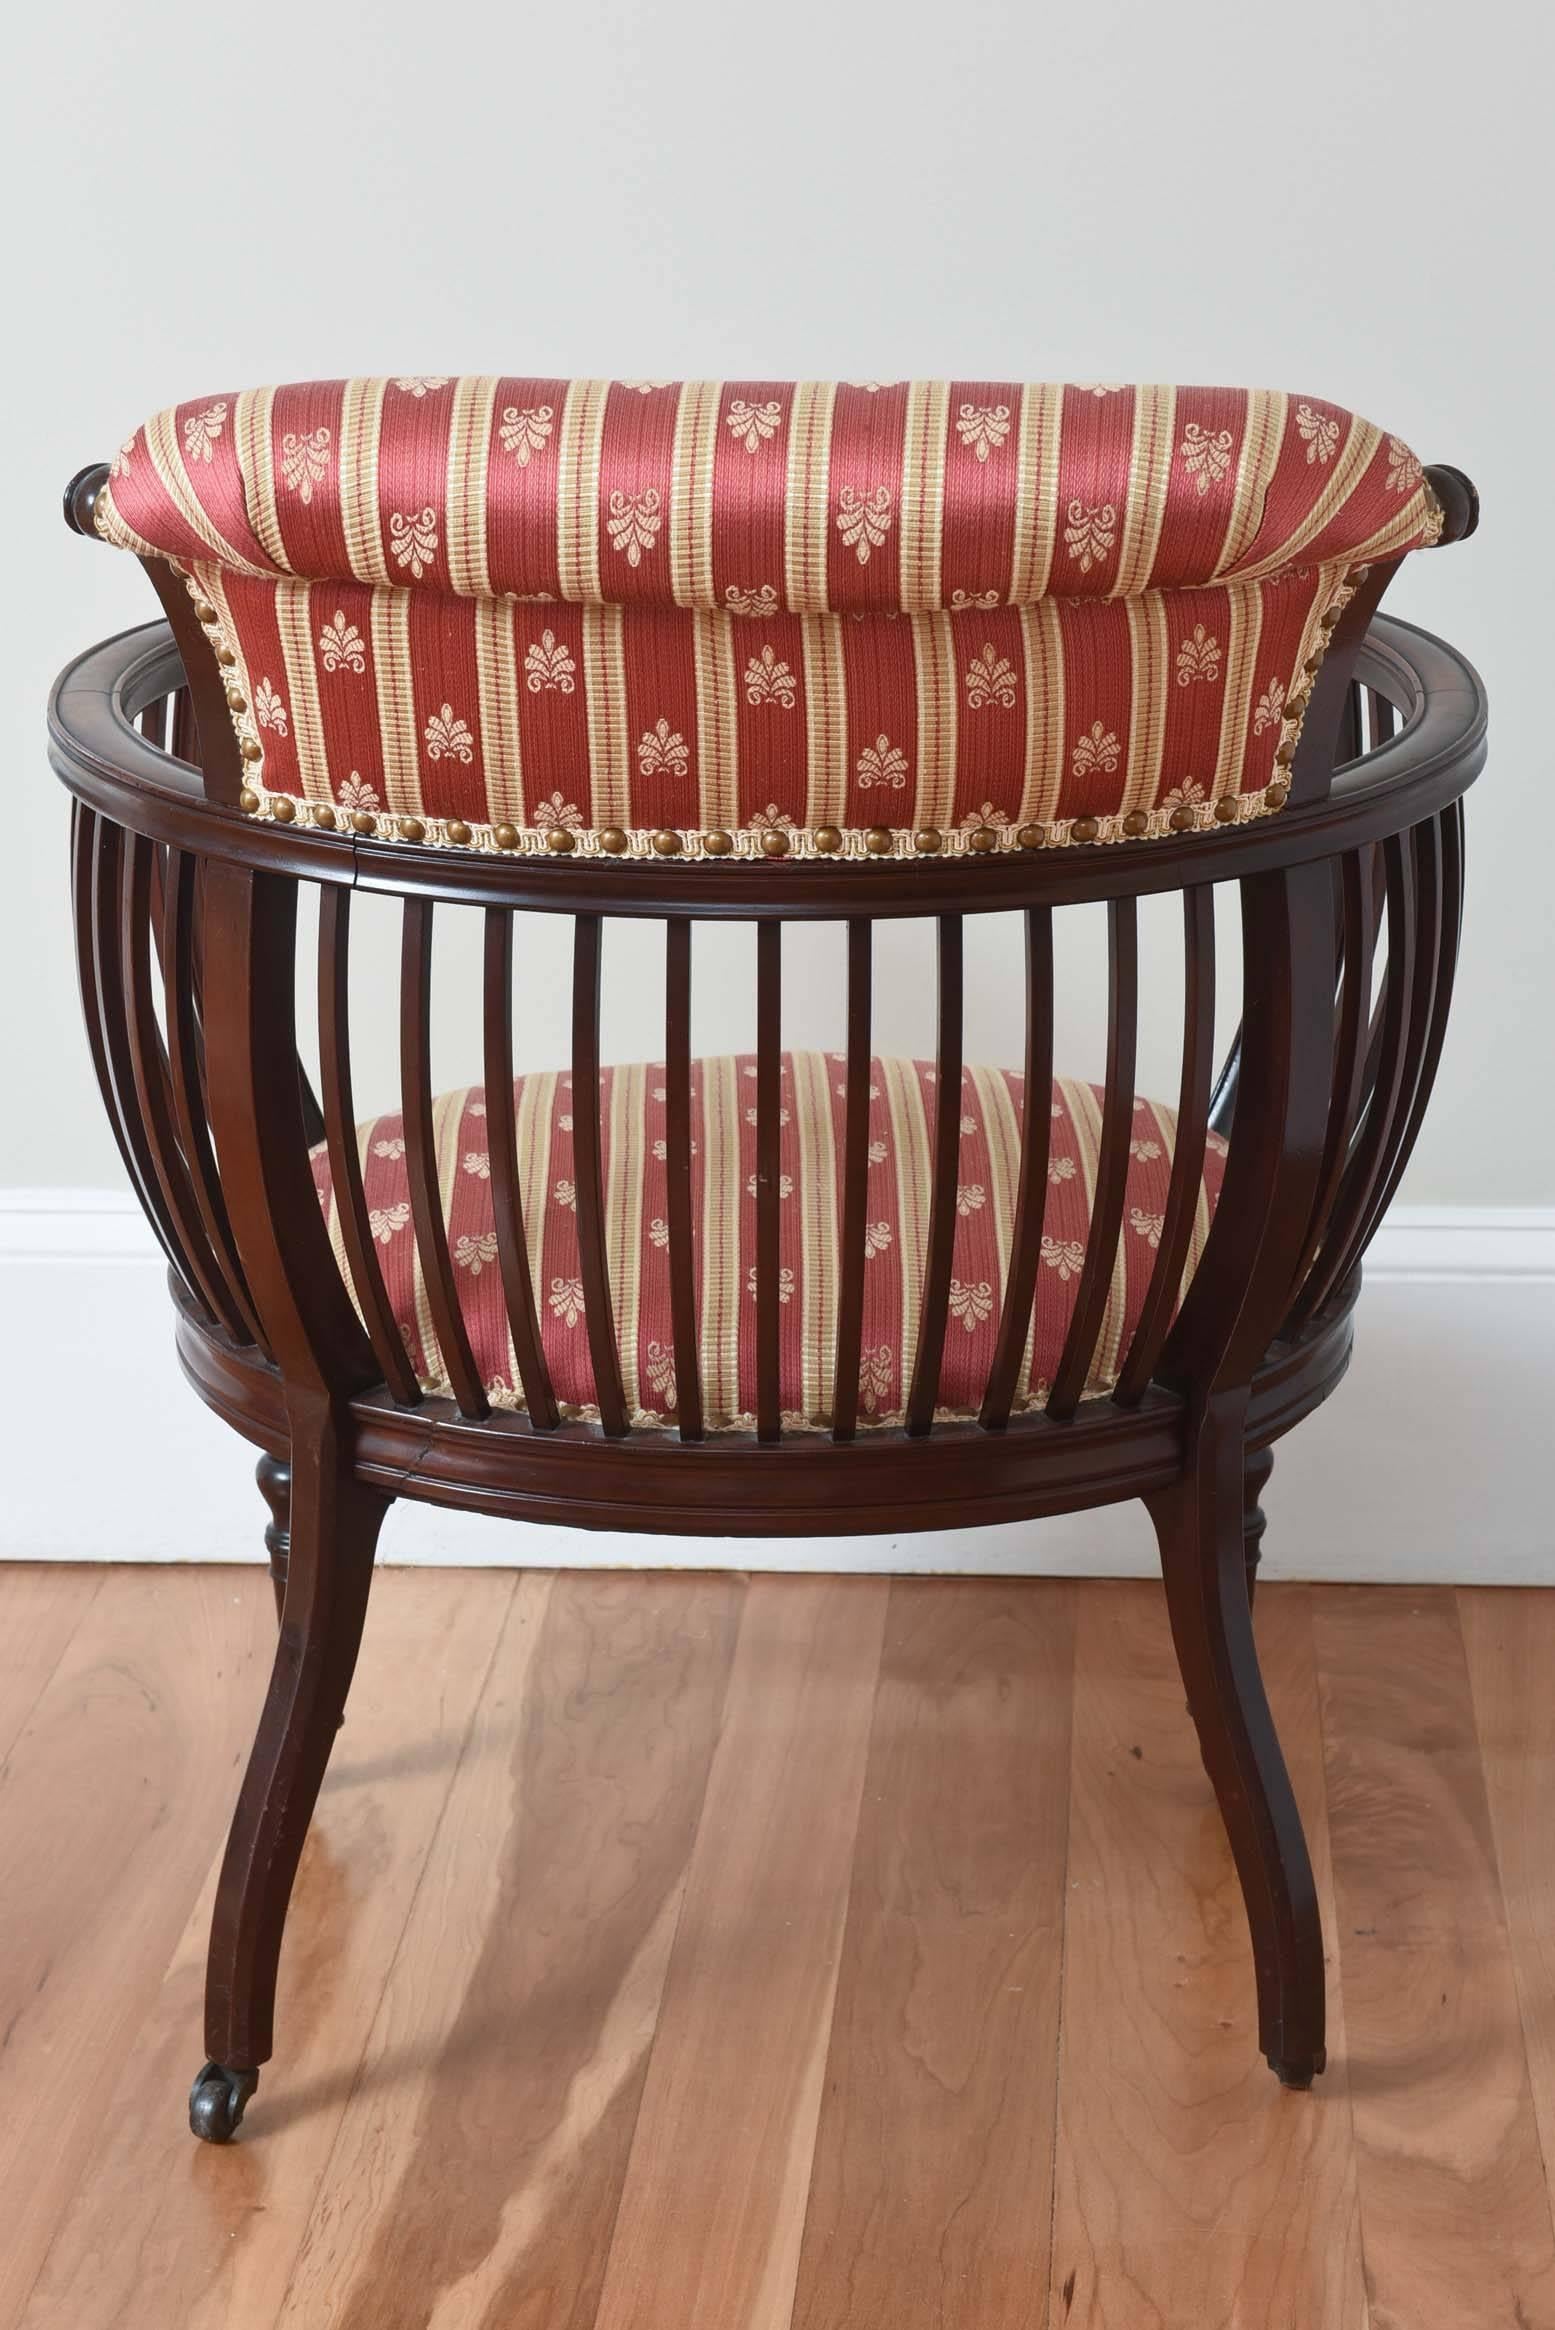 19th Century Antique Curved Back Occasional or Side Chair, Finely Carved with Great Detail